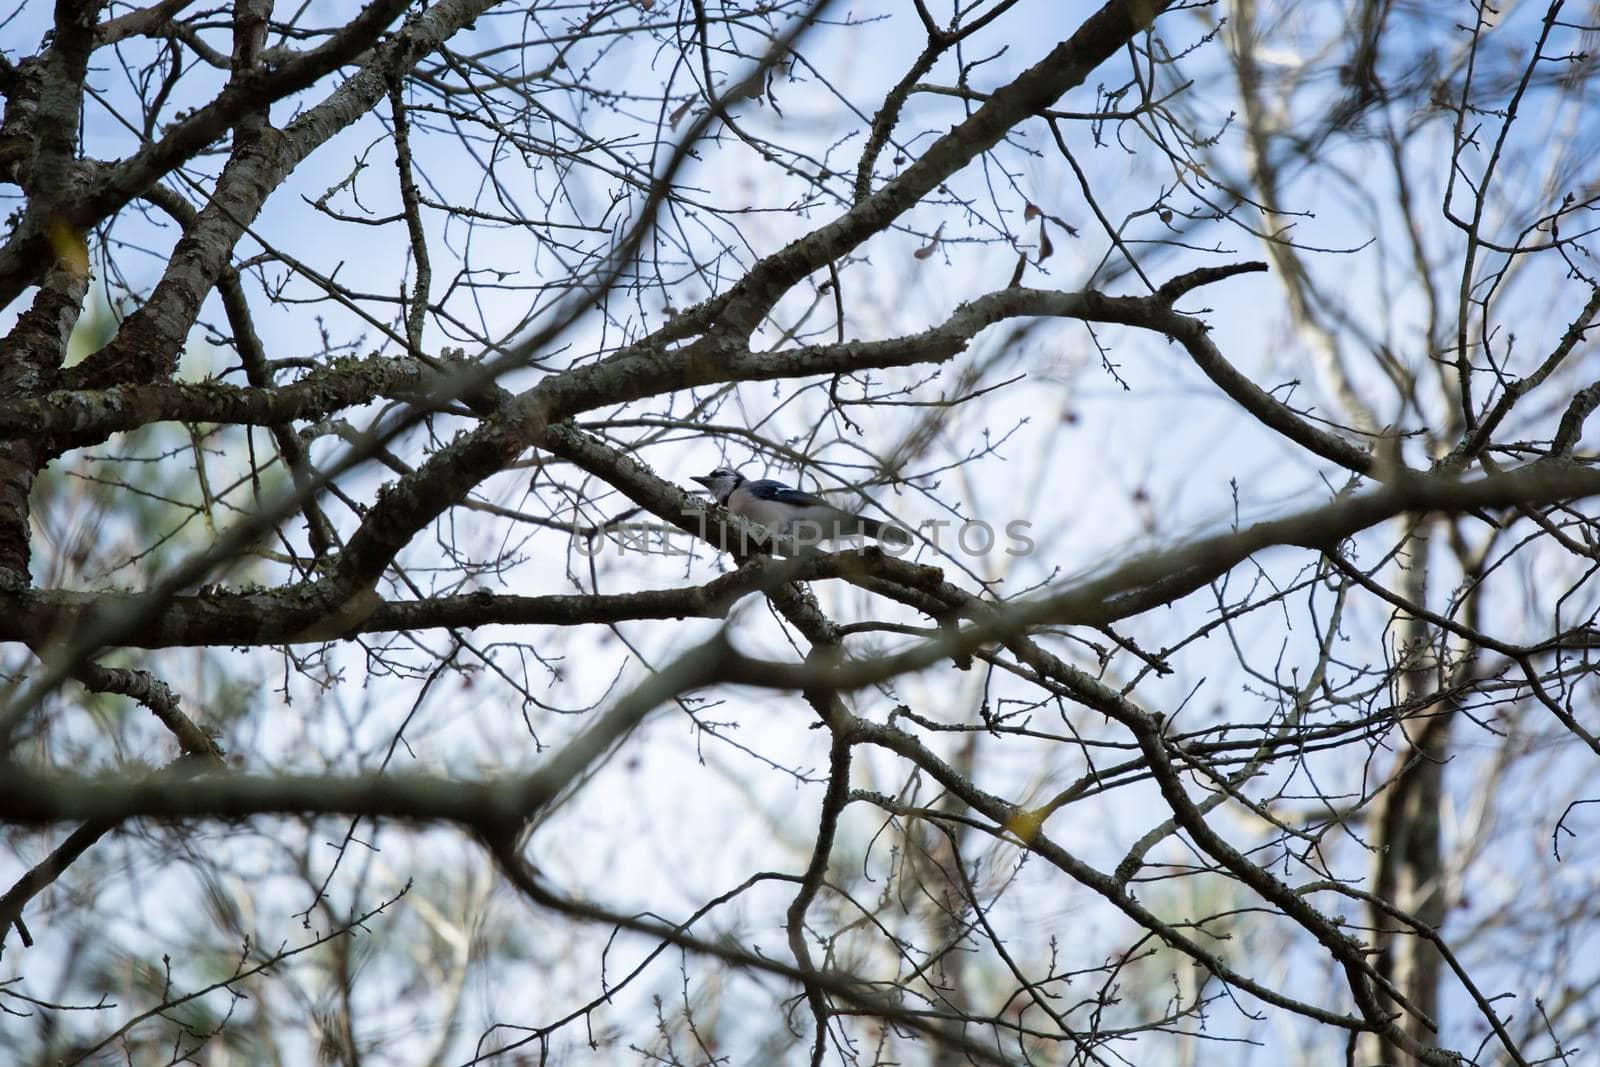 Profile of a blue jay (Cyanocitta cristata) perched on a branch